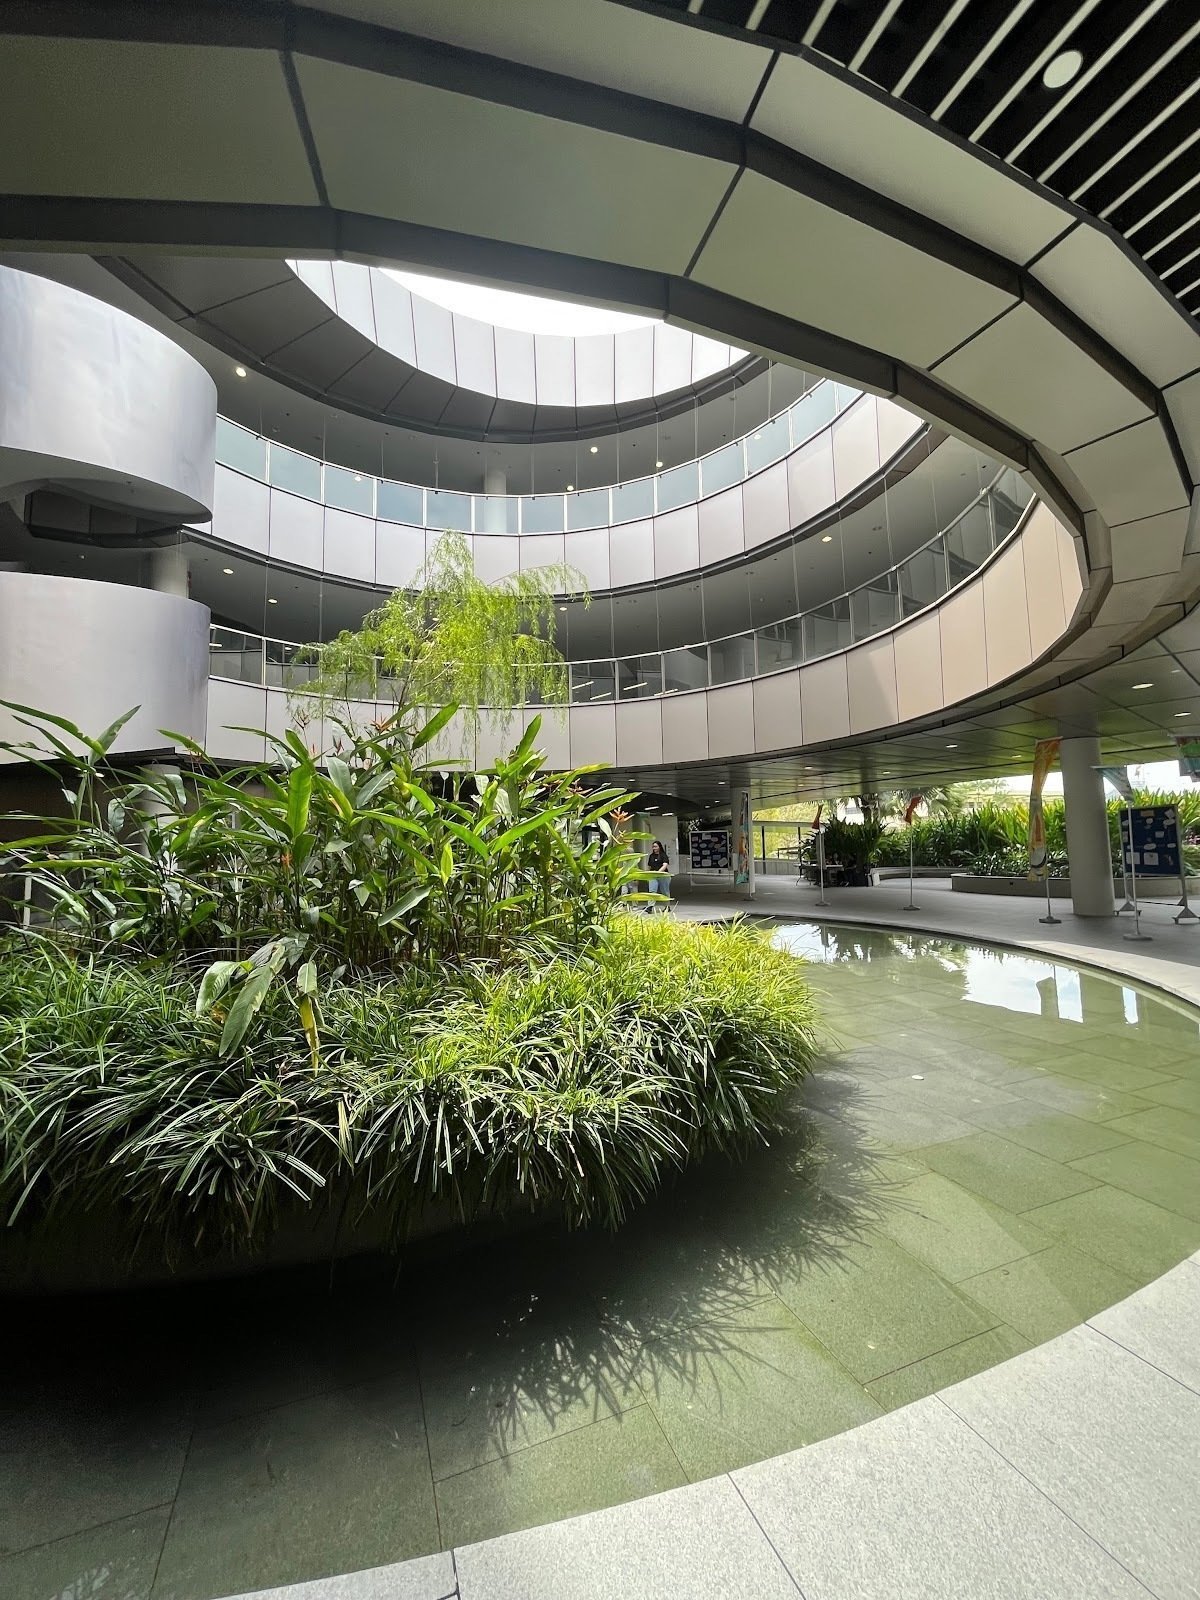 <span class="translation_missing" title="translation missing: en.meta.location_title, location_name: The Arc - Learning Hub North (LHN), city: Singapore">Location Title</span>